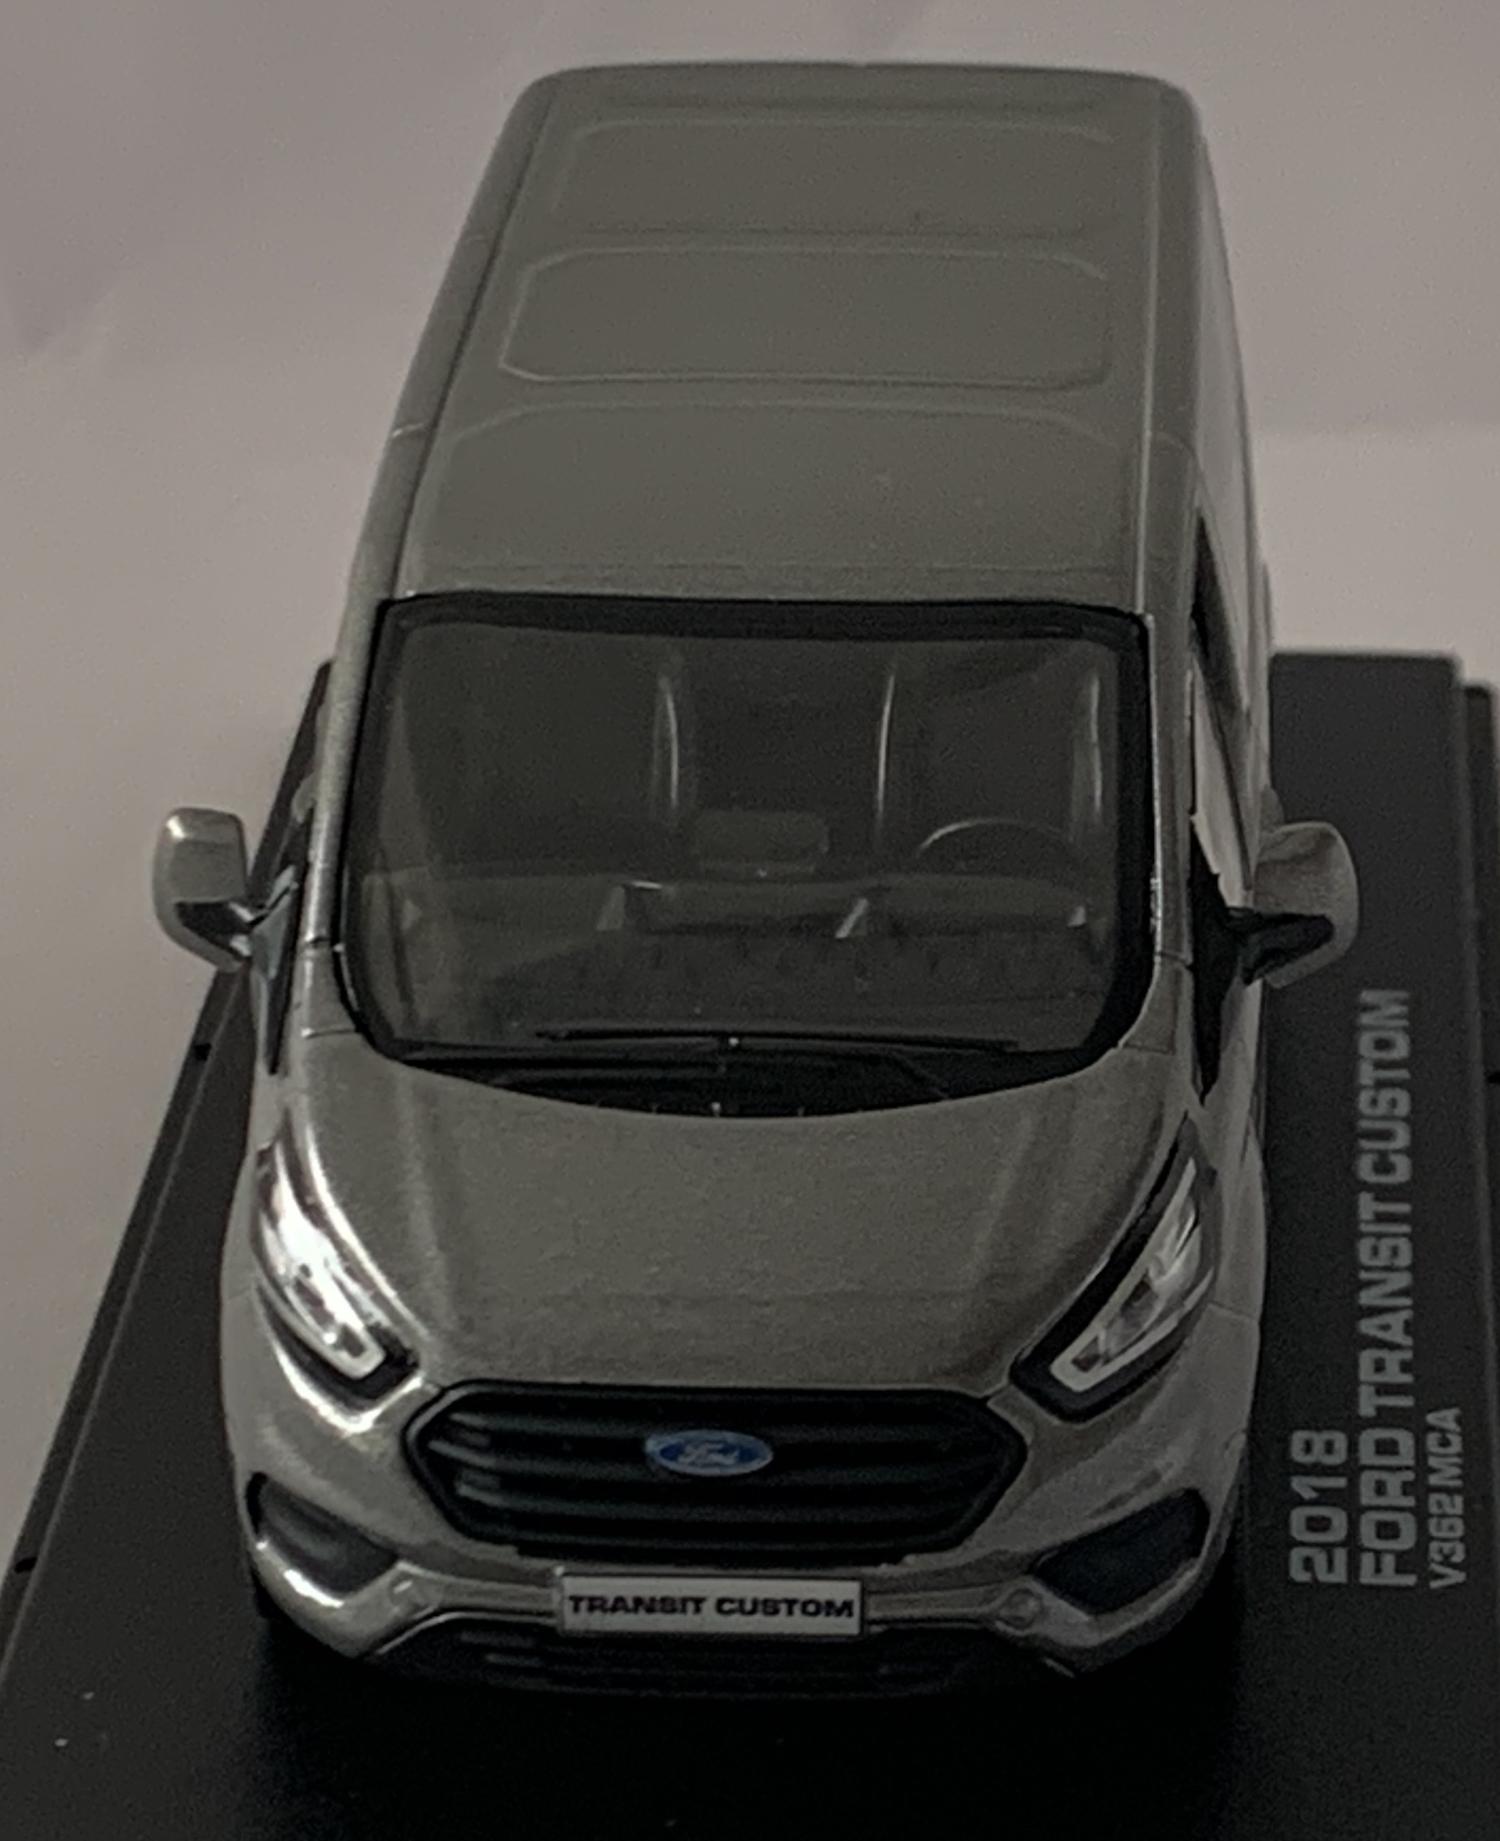 Ford Transit Custom V362 MCA 2018 in magnetic grey 1:43 scale  van model from Greenlight, limited edition